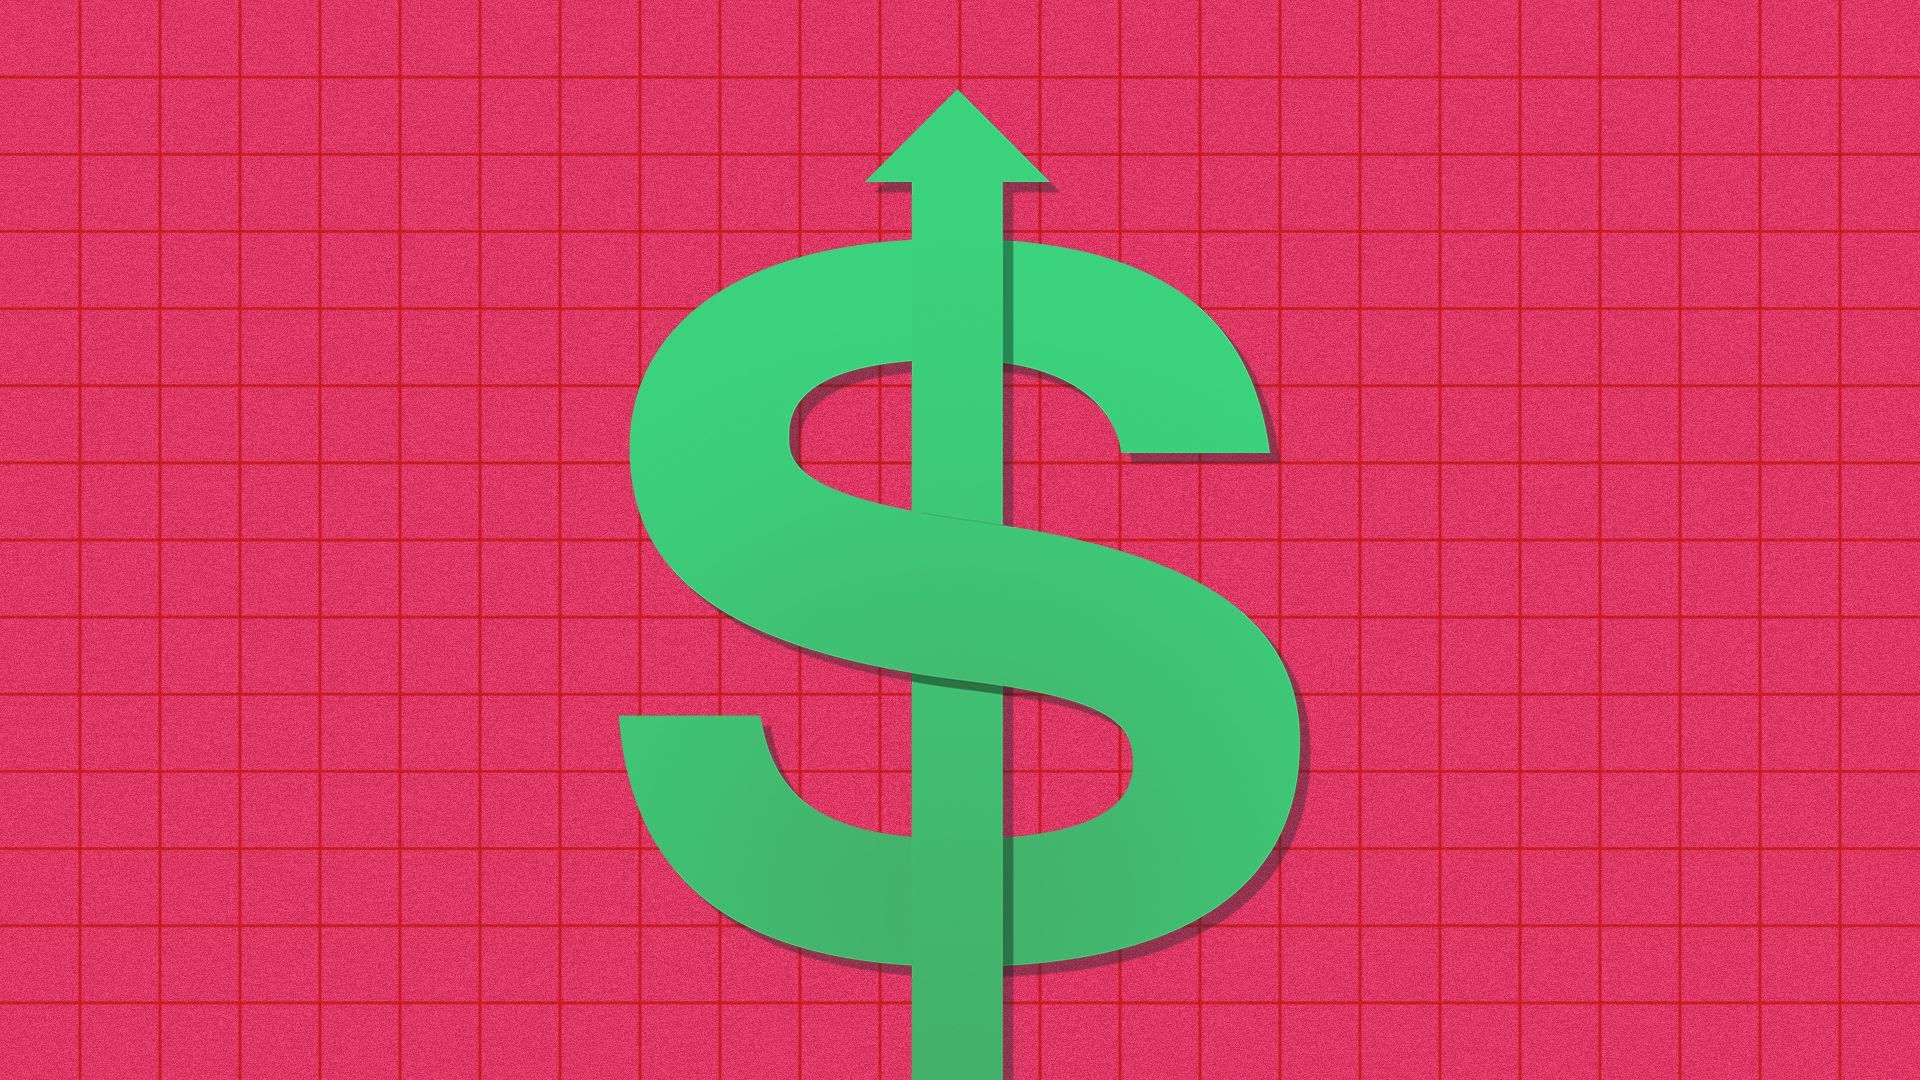 A green dollar sign against a pink background